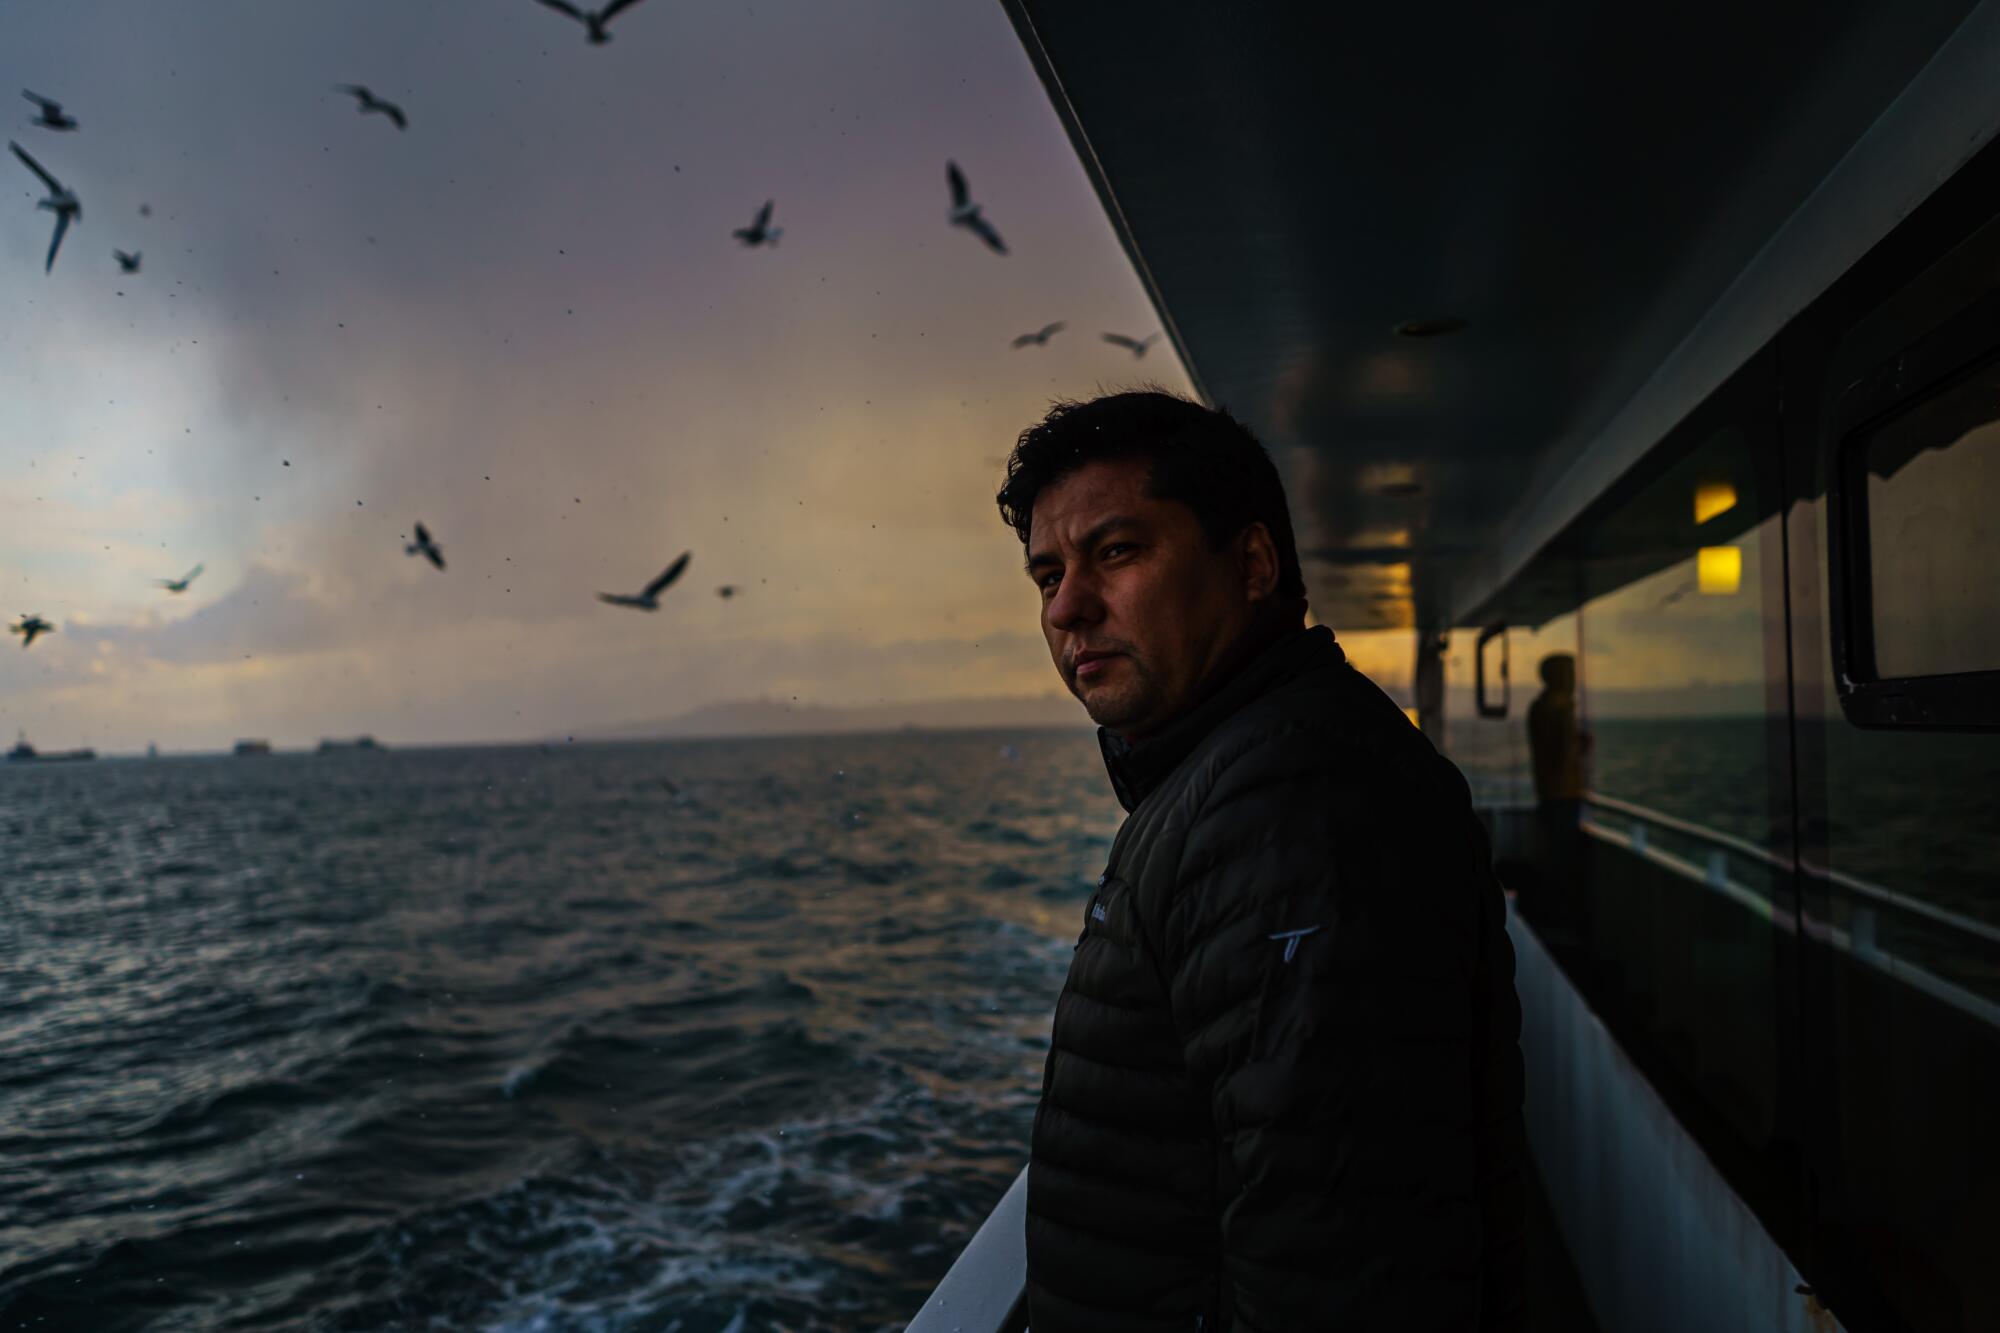 A man stands on a ferry, with the ocean and sky as a backdrop